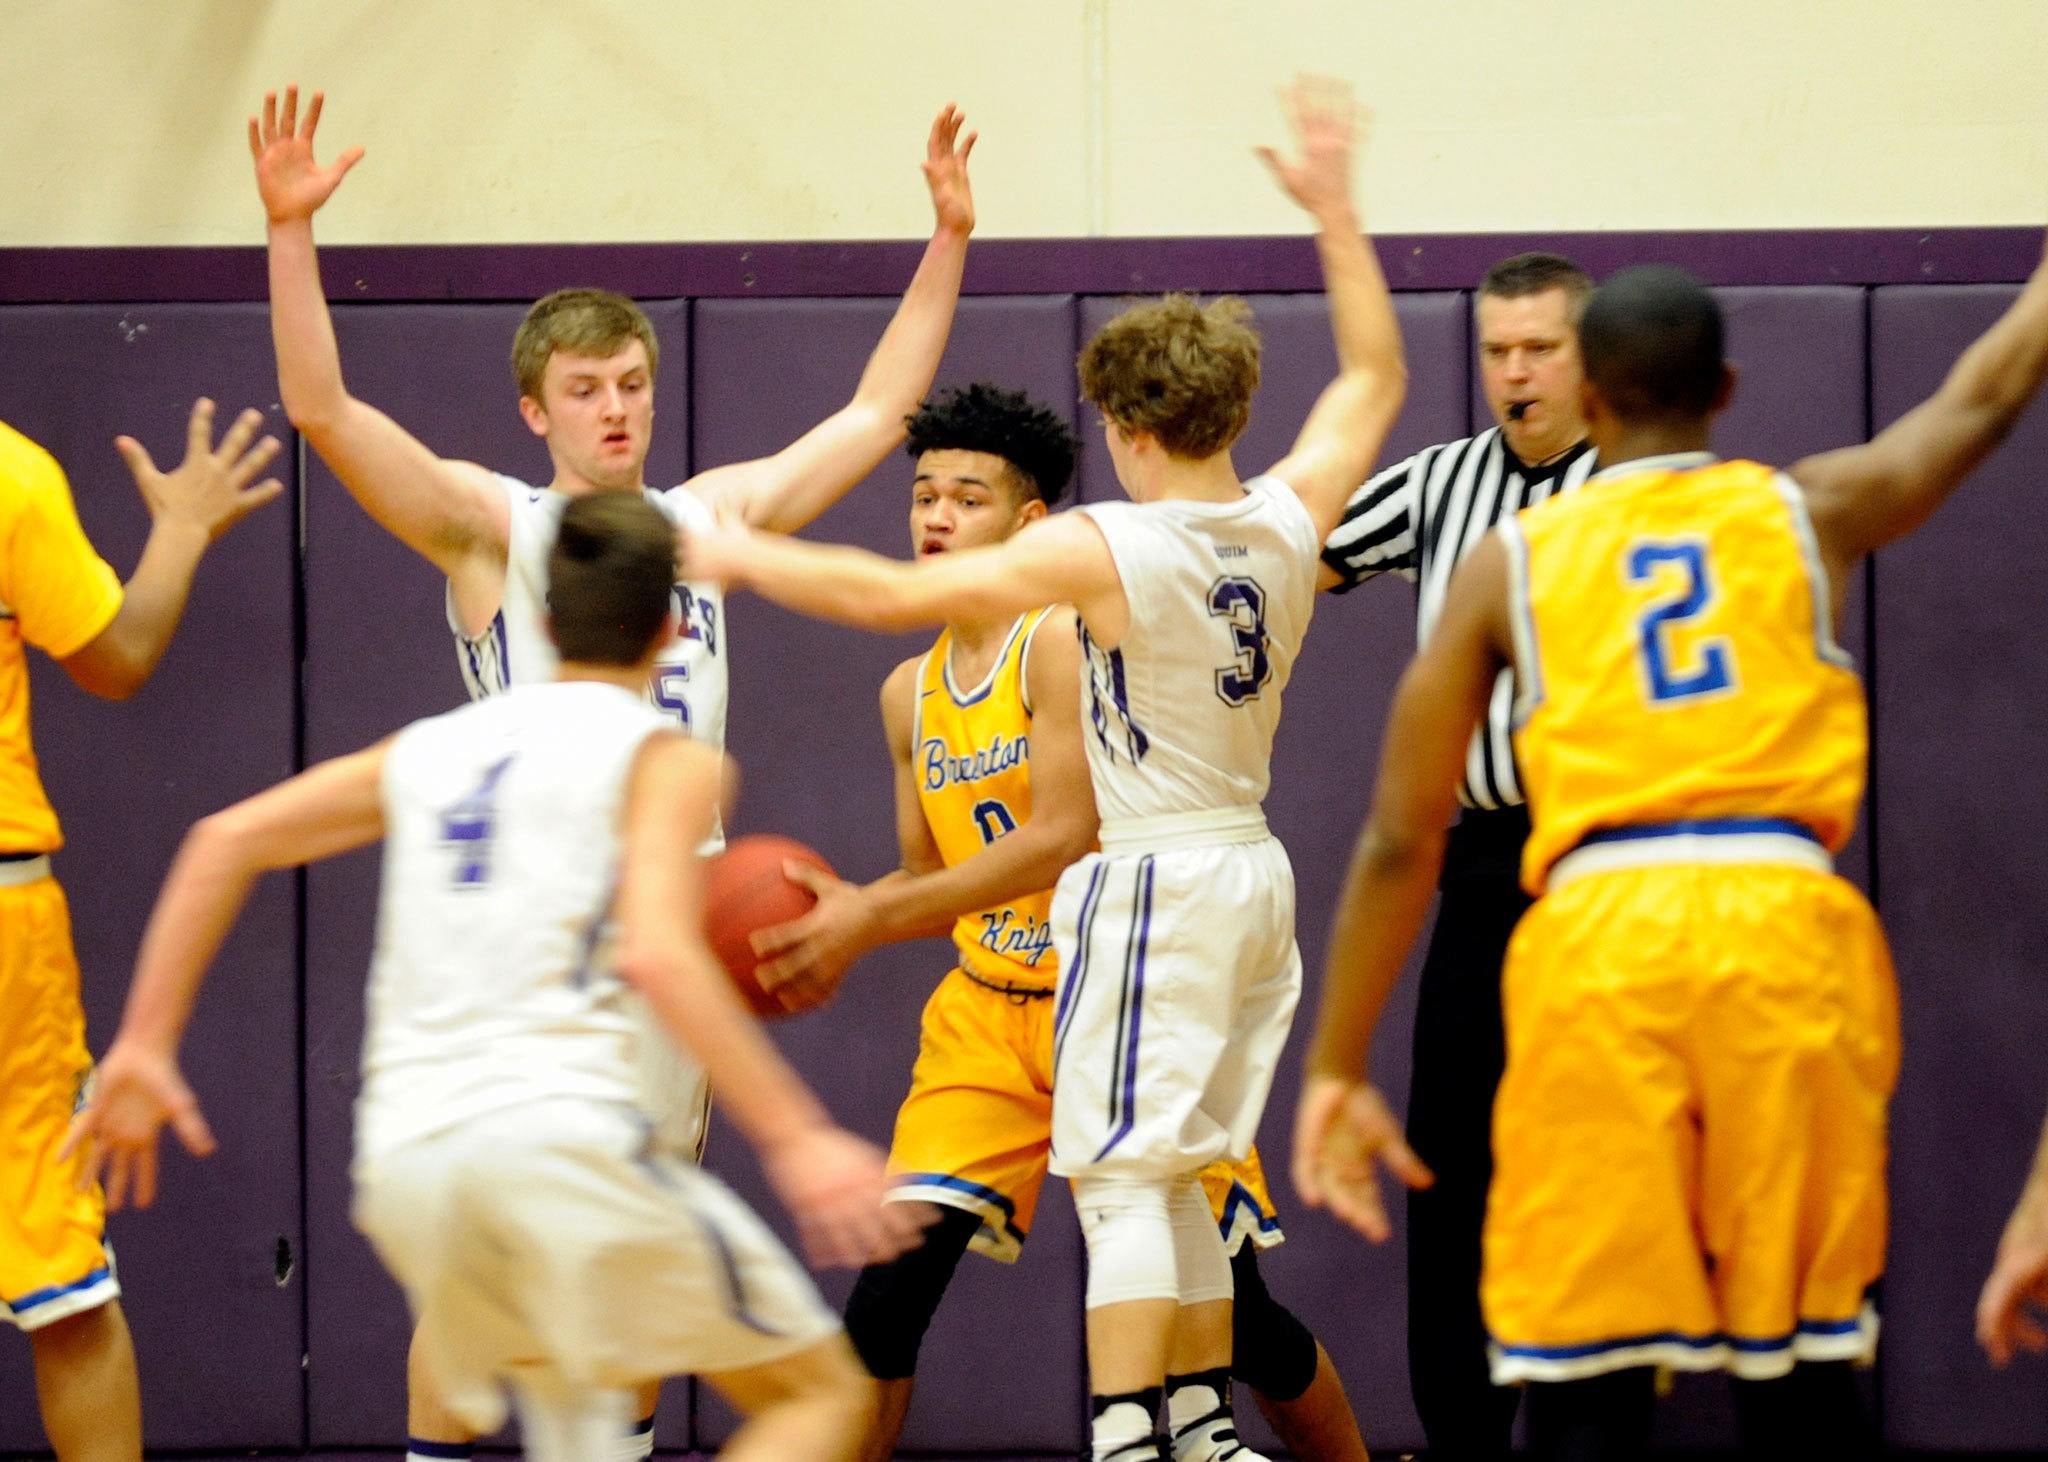 Bremerton’s Domonic Baker is swarmed by Sequim’s Nate Despain, Riley Cowan and Kyler Rollness in a late-game moment on Jan. 13, in Sequim. Bremerton went on to win 52-42. Sequim Gazette photos by Matthew Nash